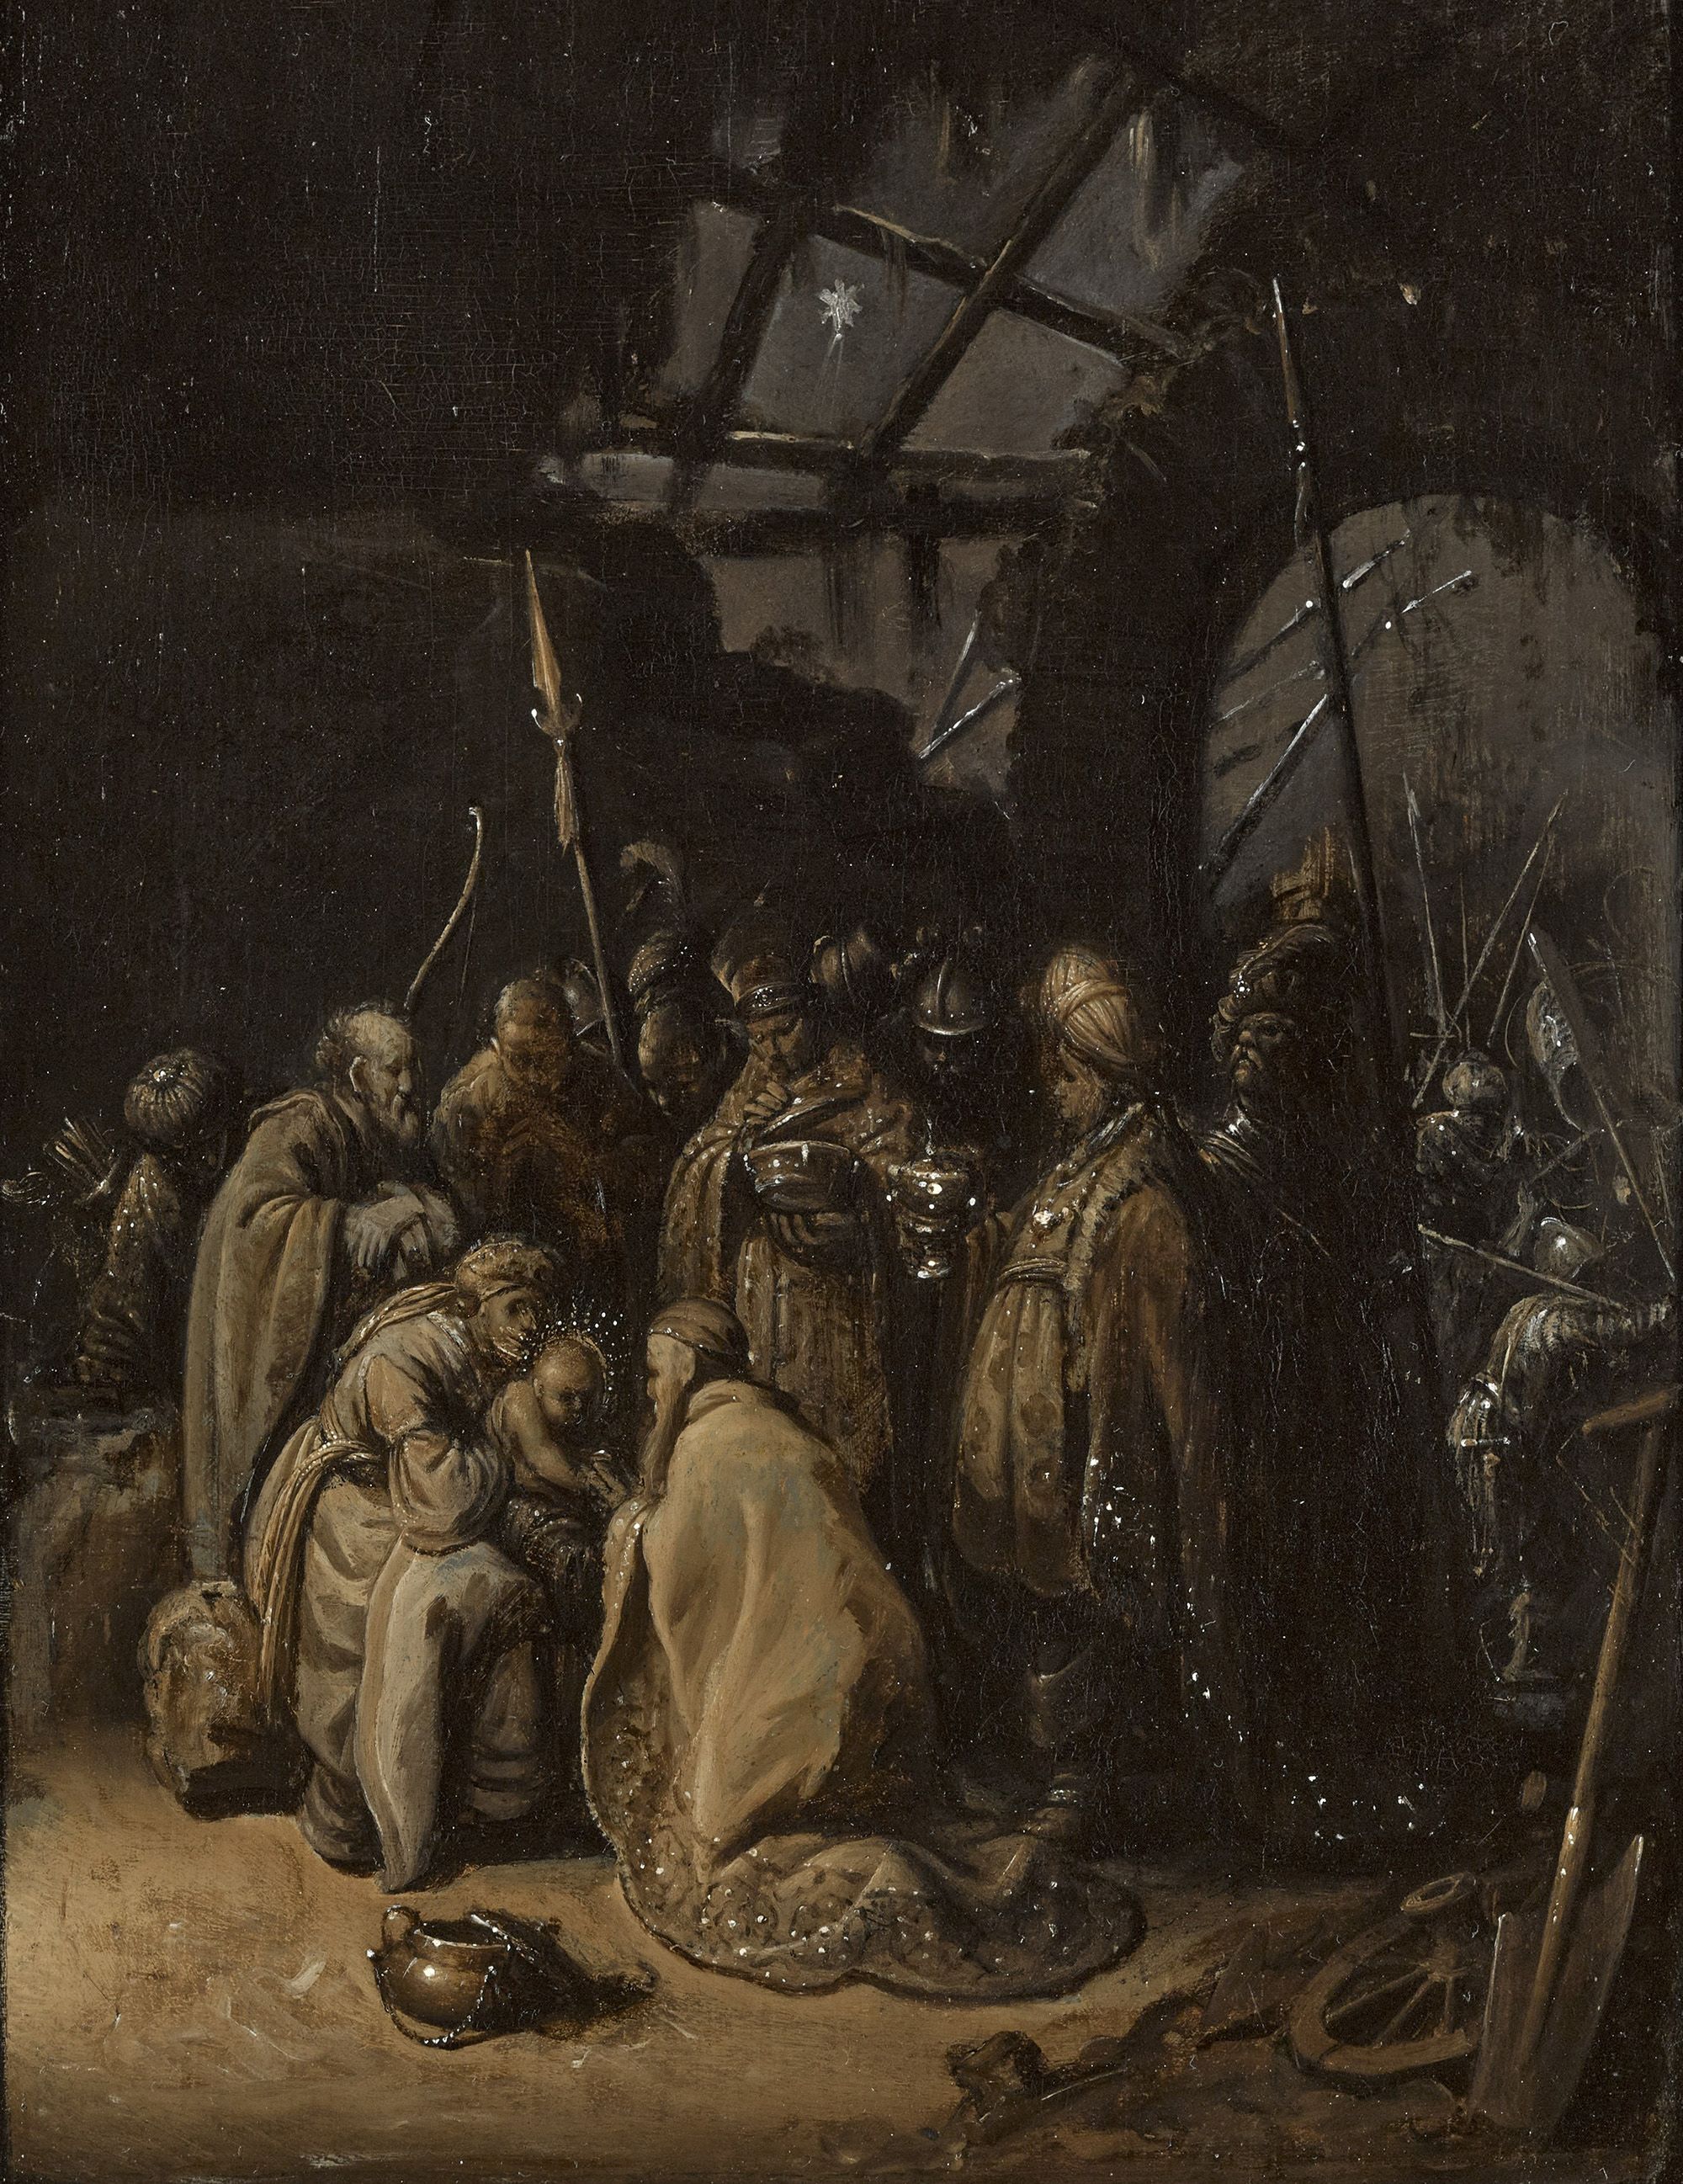 "Adoration of the Kings" is now thought to have been painted by the Dutch master Rembrandt in 1628.